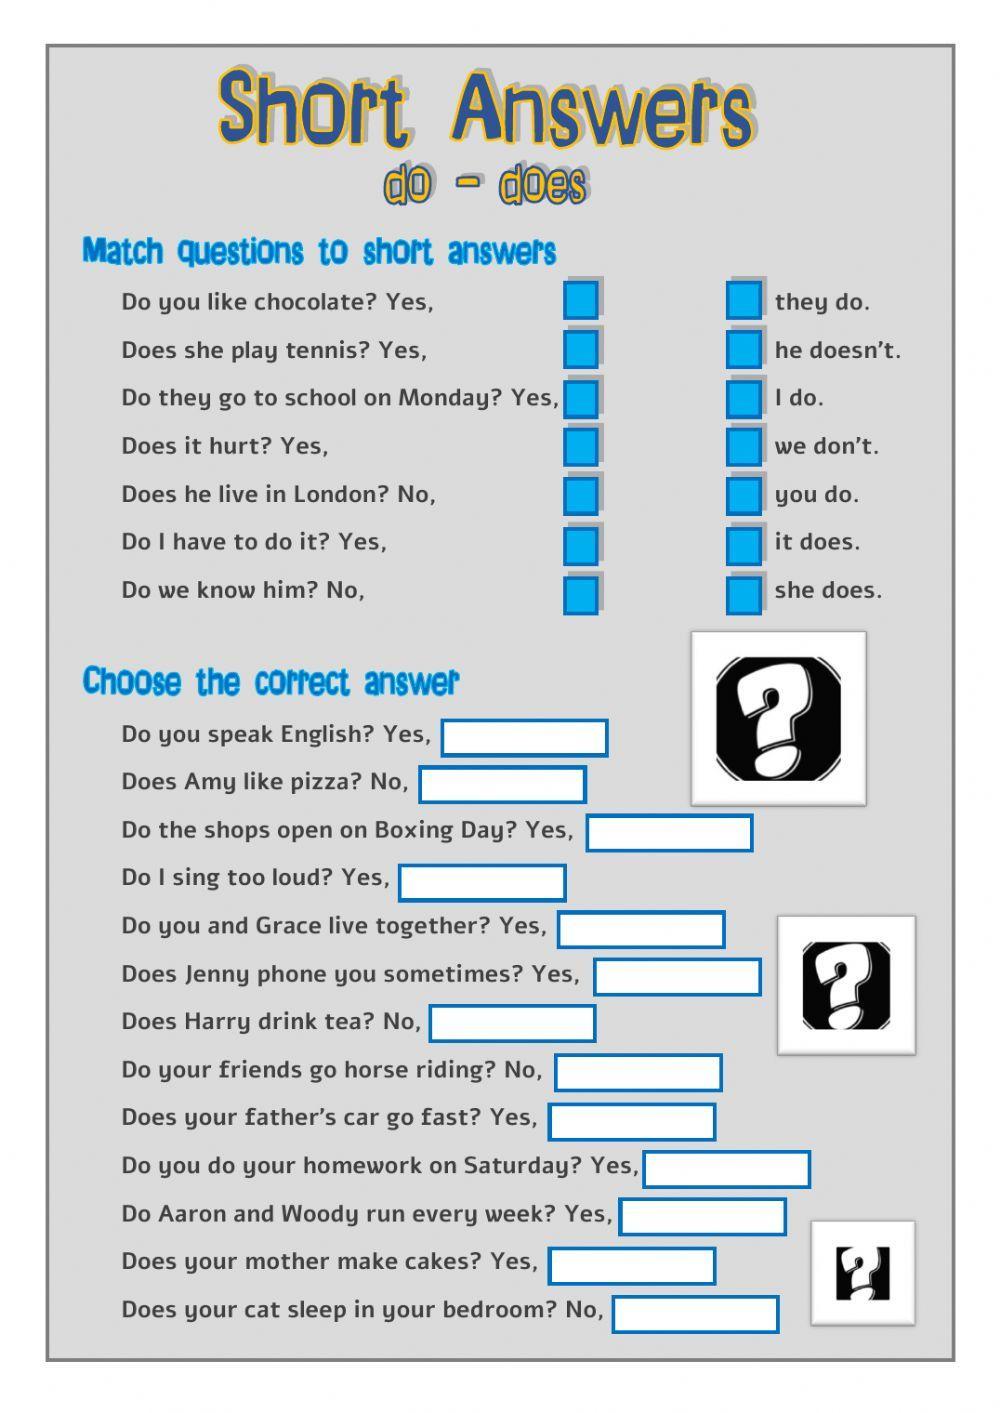 Short Answers - To do worksheet | Live Worksheets